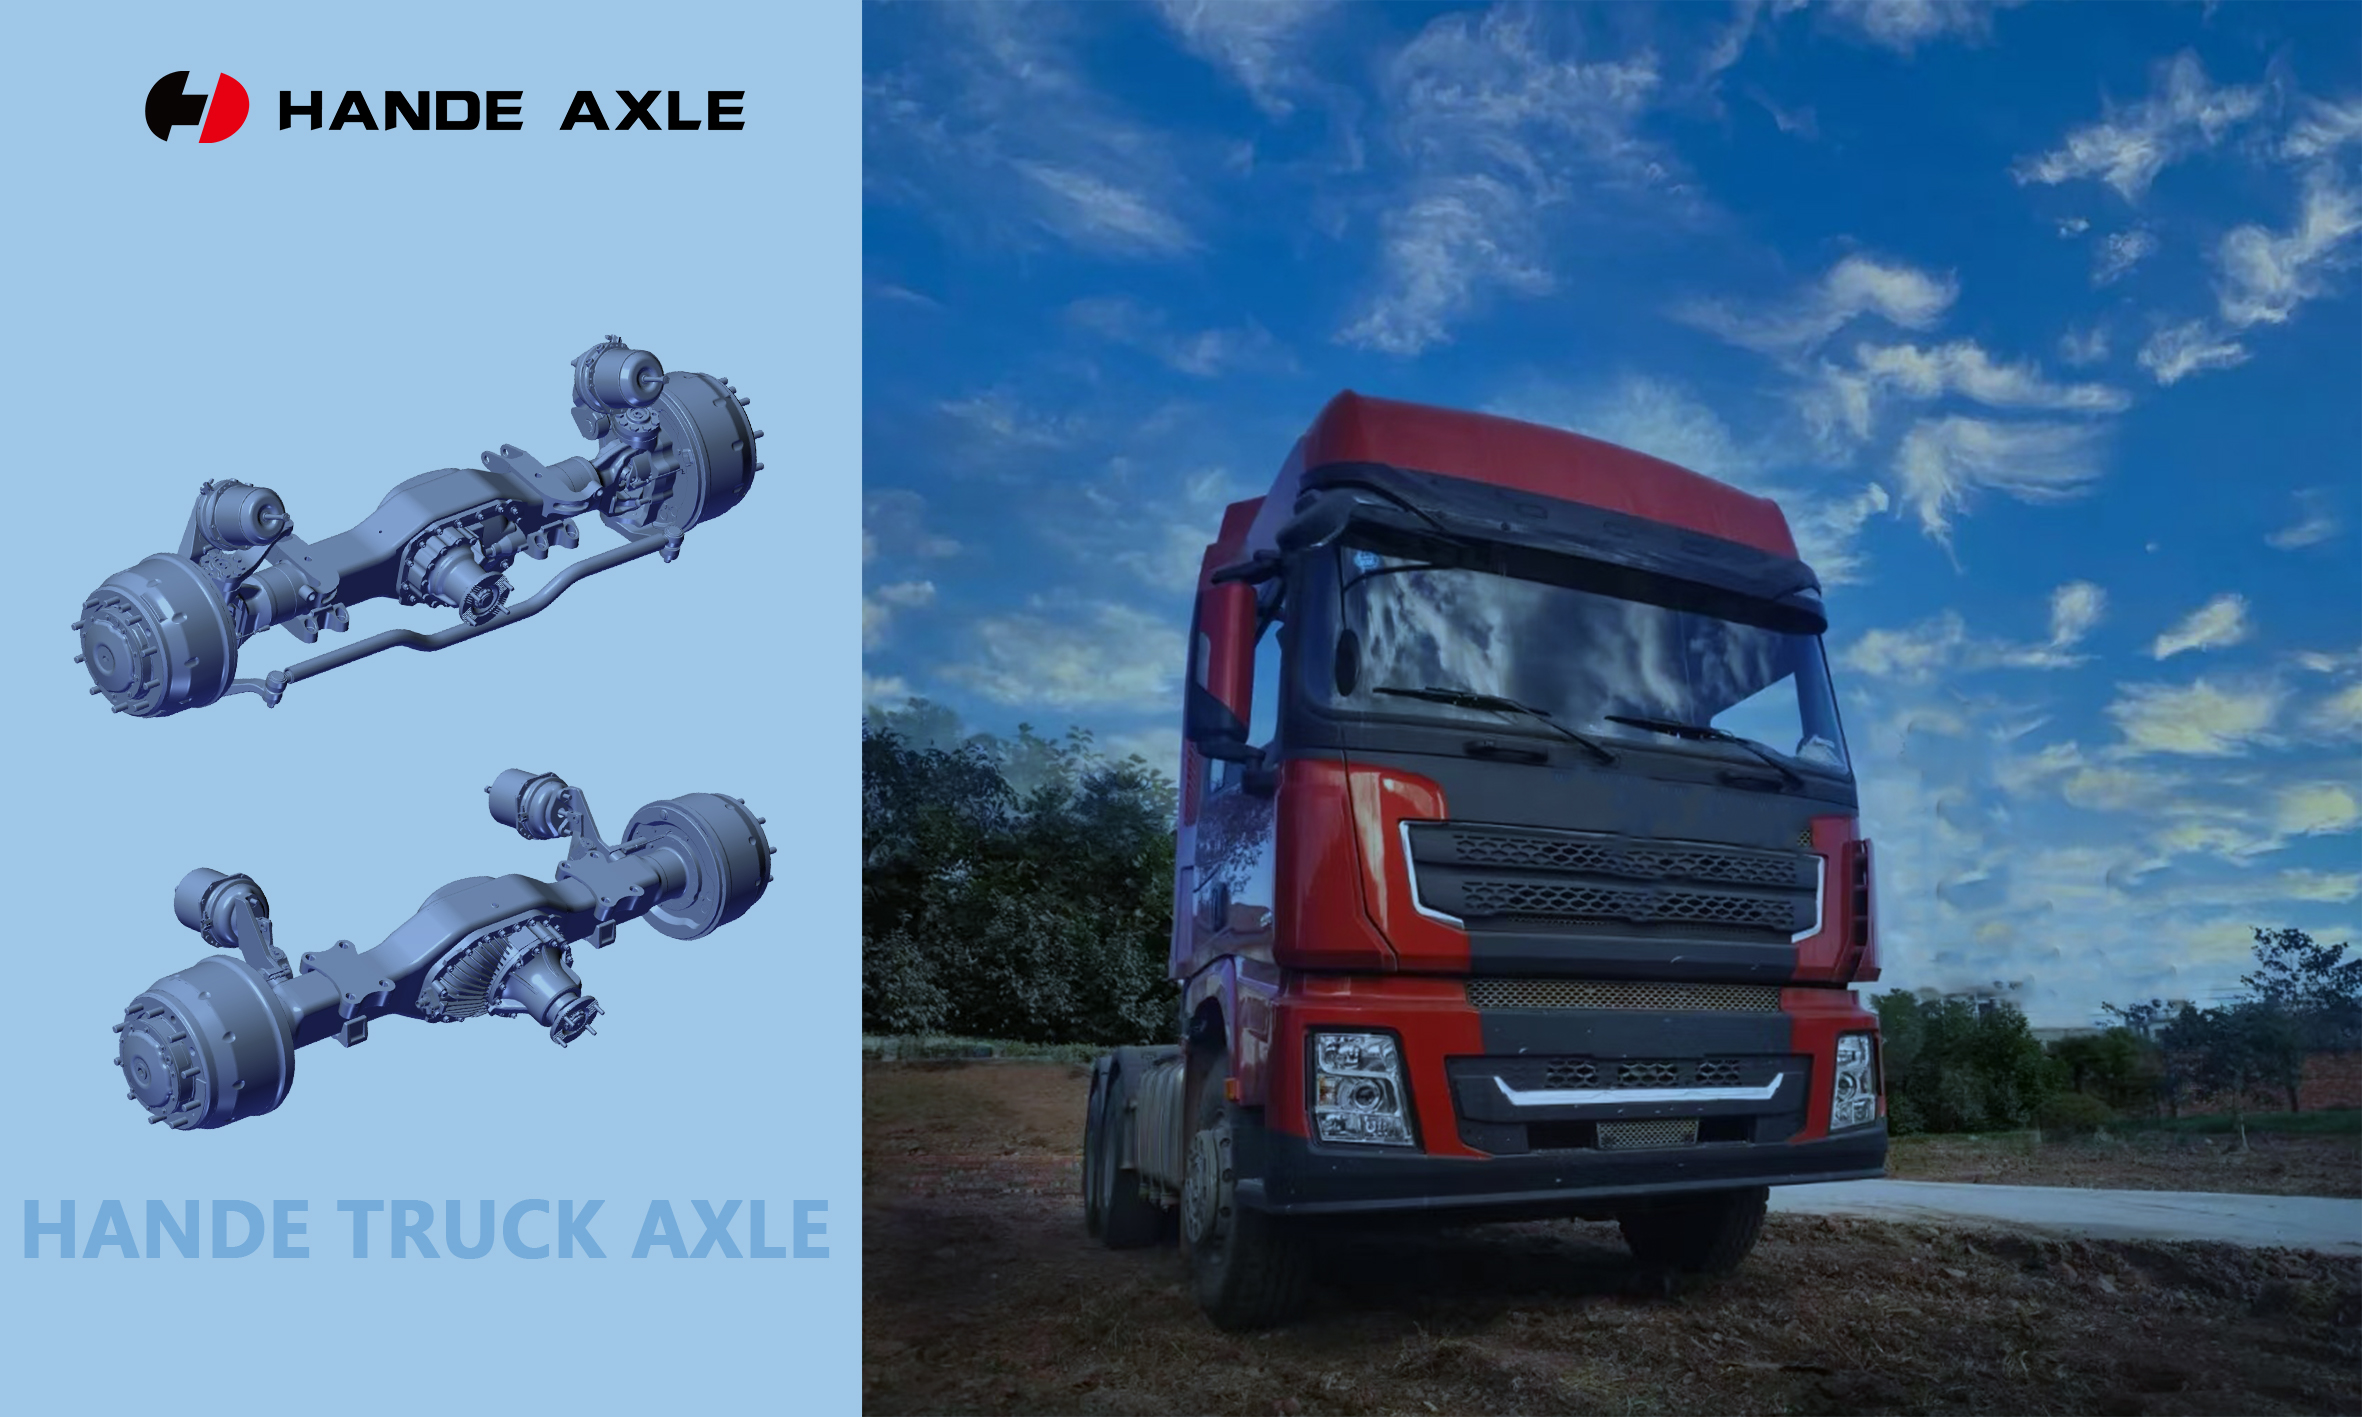 HanDe truck axle has a complete range of products